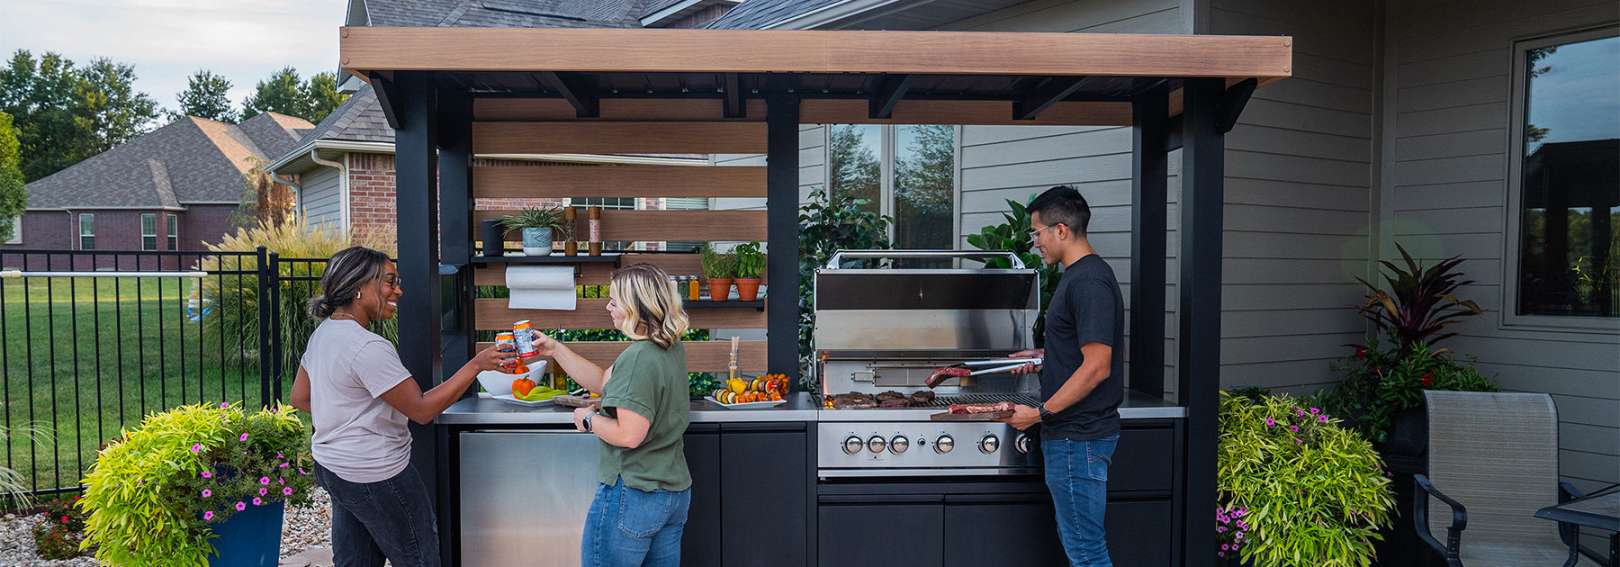 Planning an Outdoor Kitchen for Your Backyard - Backyard Discovery